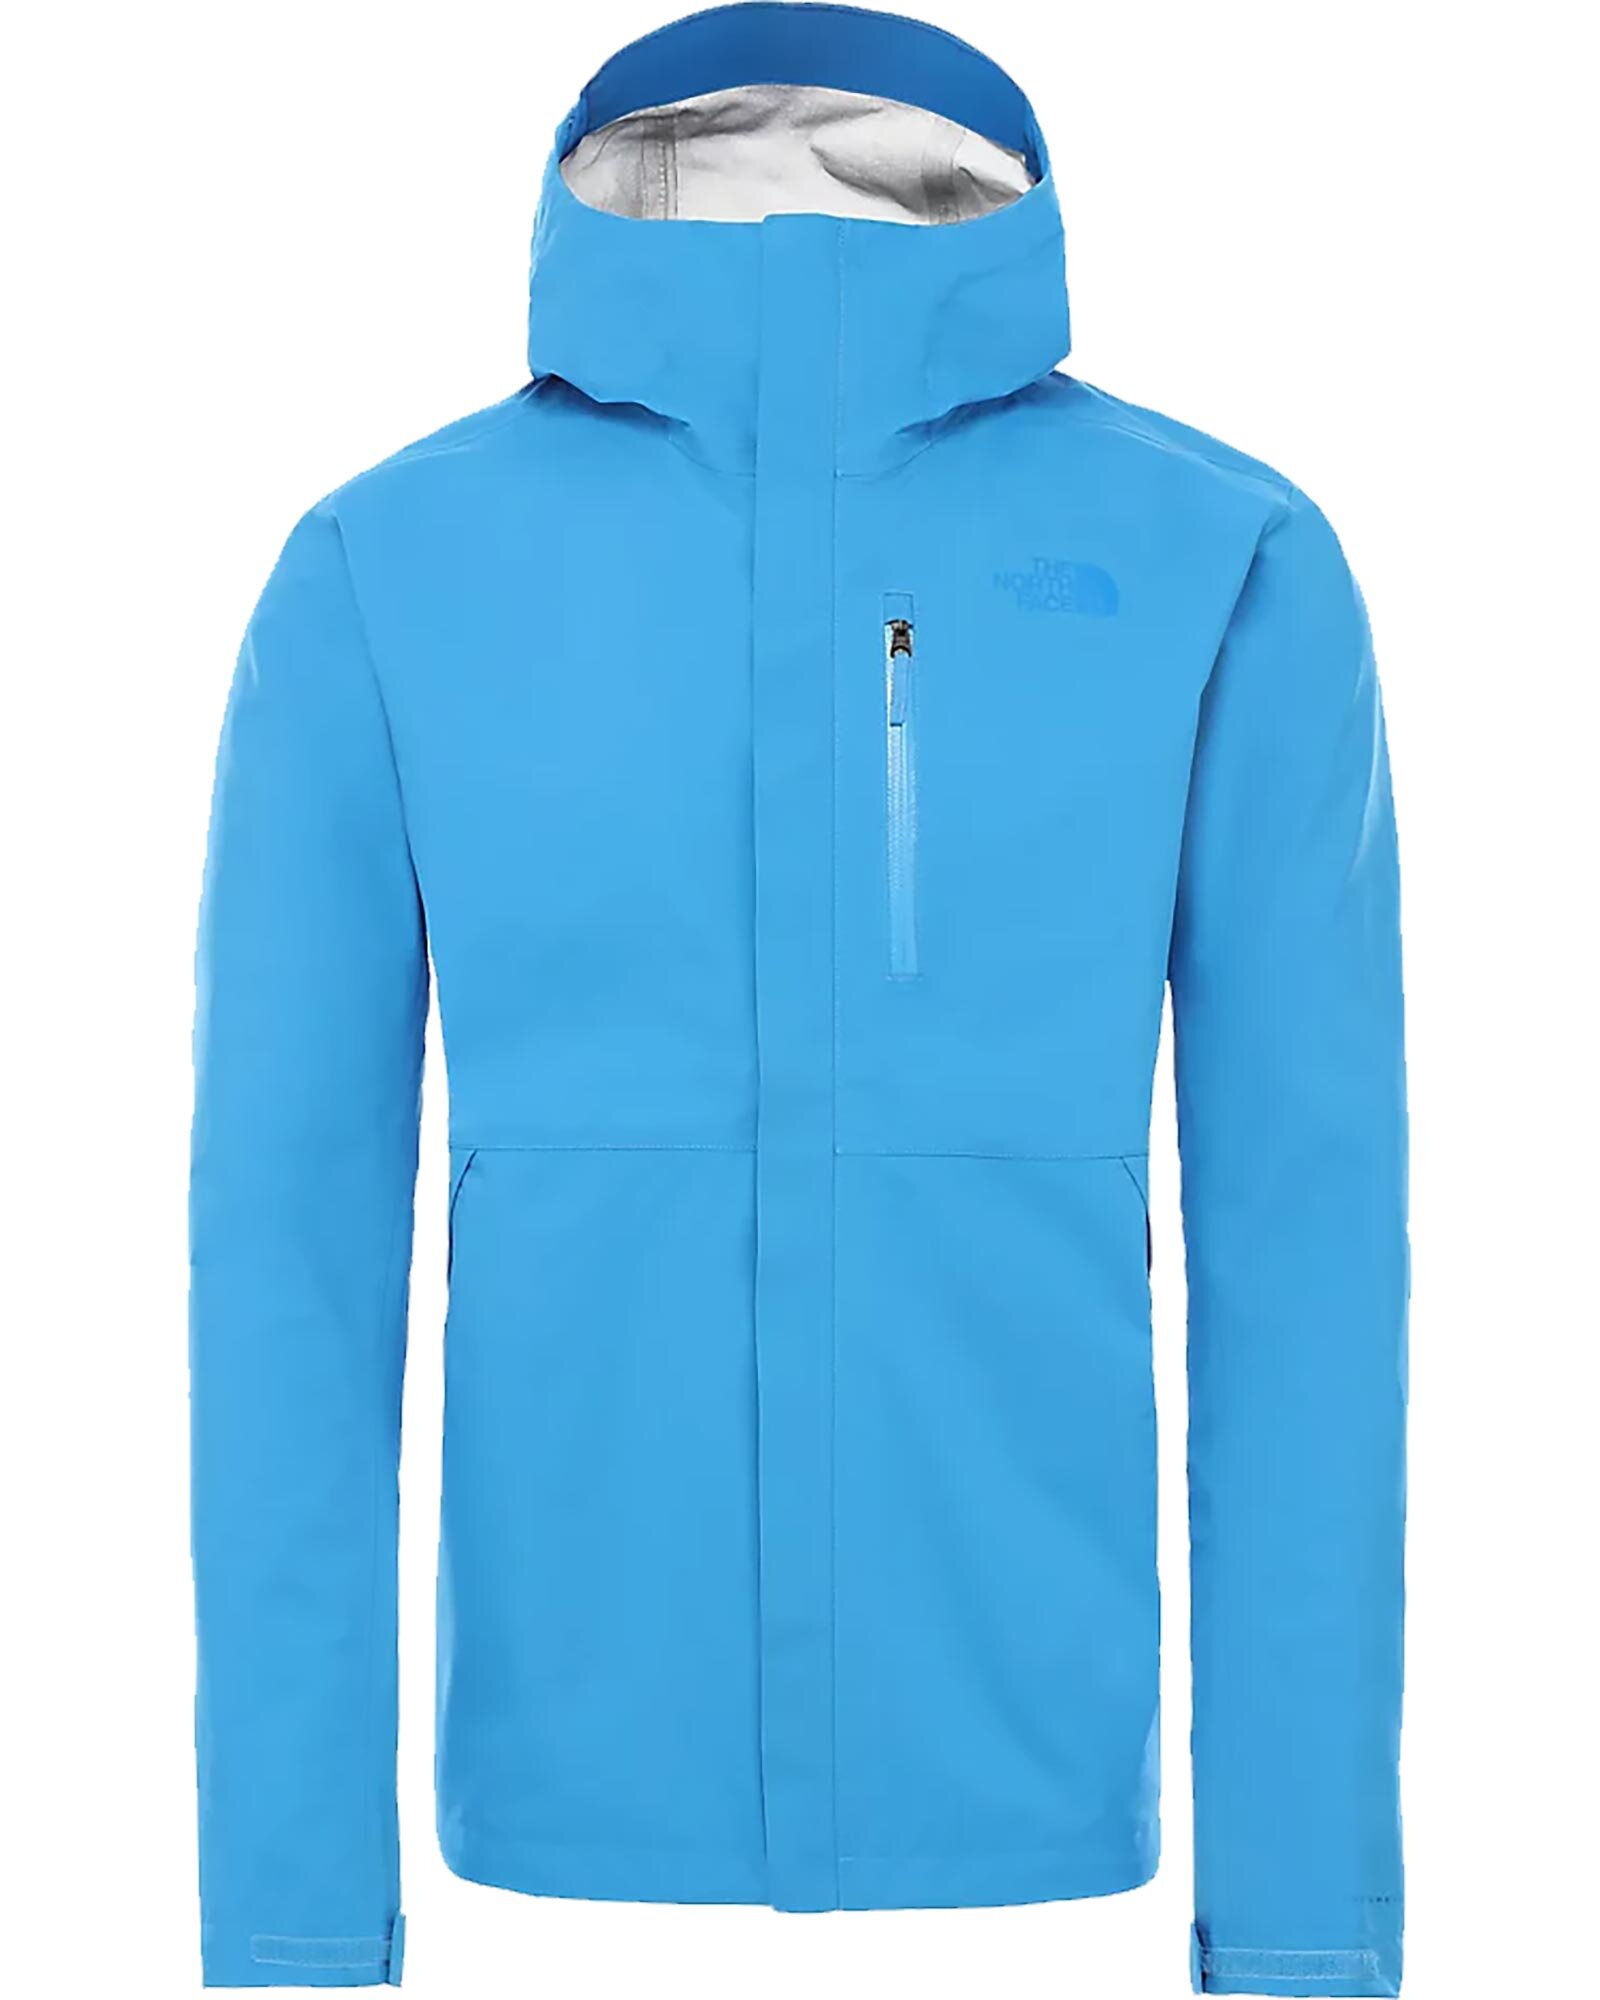 Win a or Women's The Face Dryzzle Jacket — Mountains for the Mind